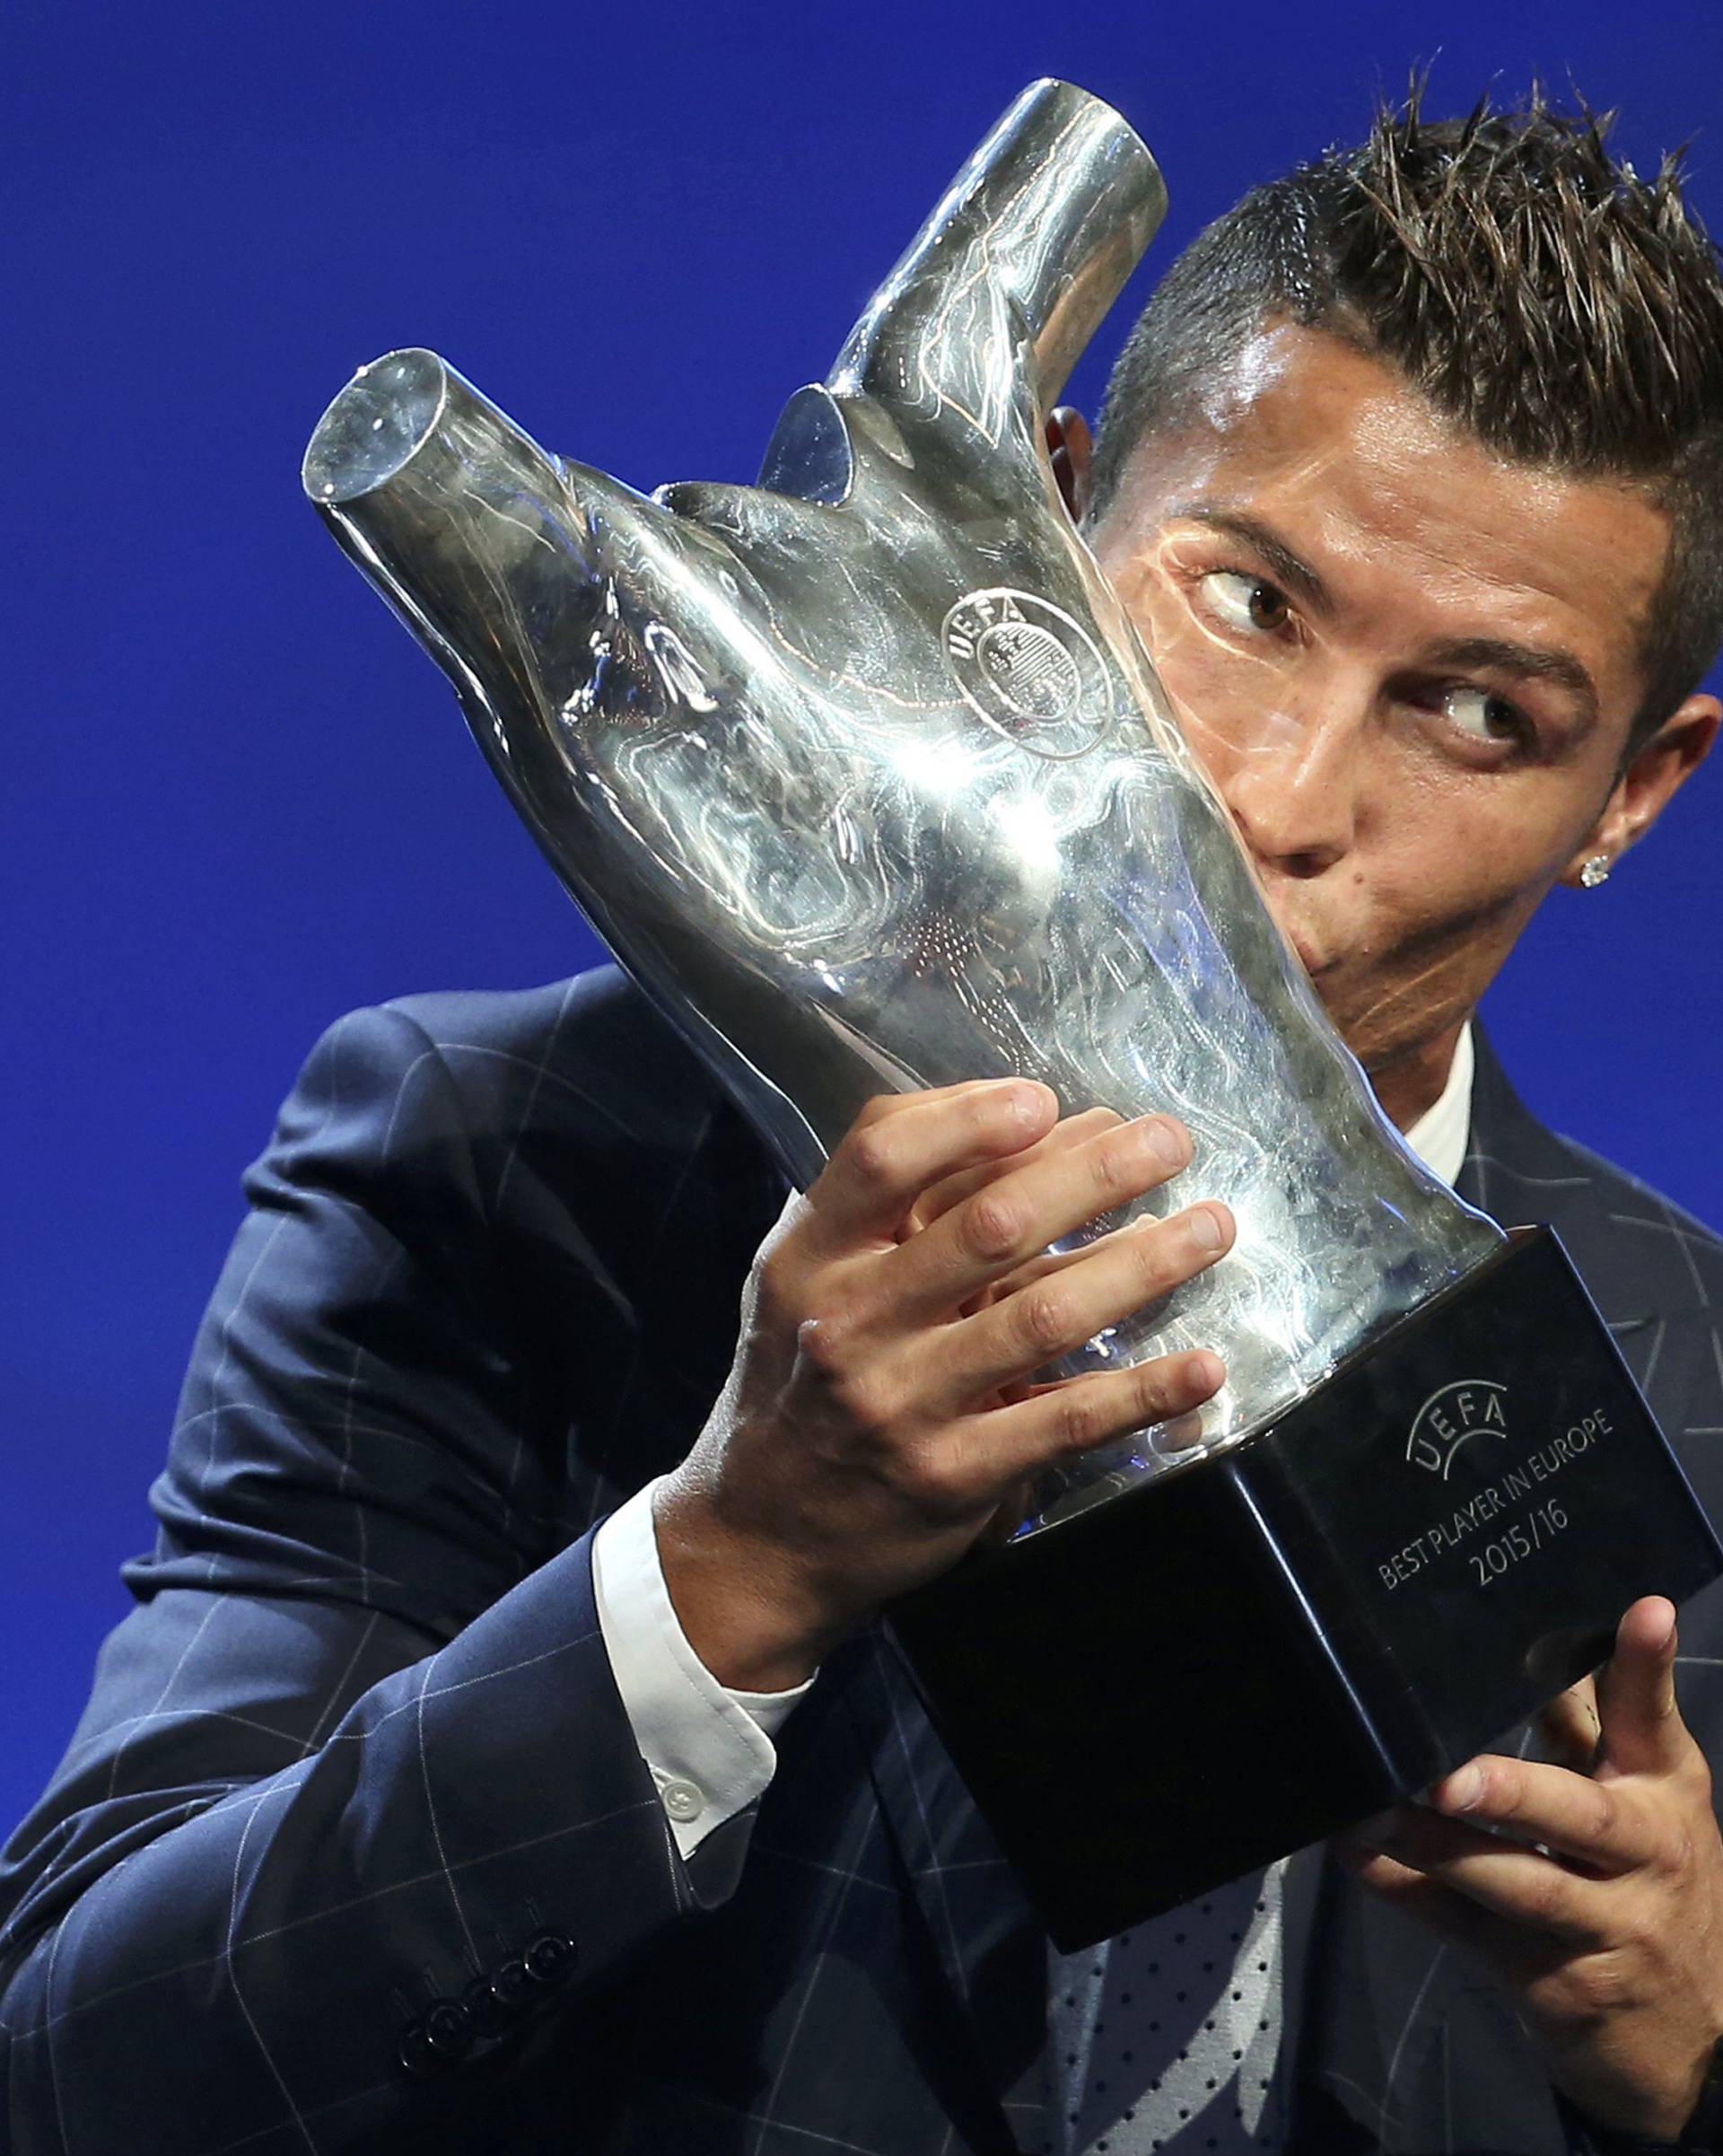 Real Madrid's Cristiano Ronaldo of Portugal kisses the Best Player UEFA 2015/16 Award during the draw ceremony for the 2016/2017 Champions League Cup soccer competition at Monaco's Grimaldi in Monaco